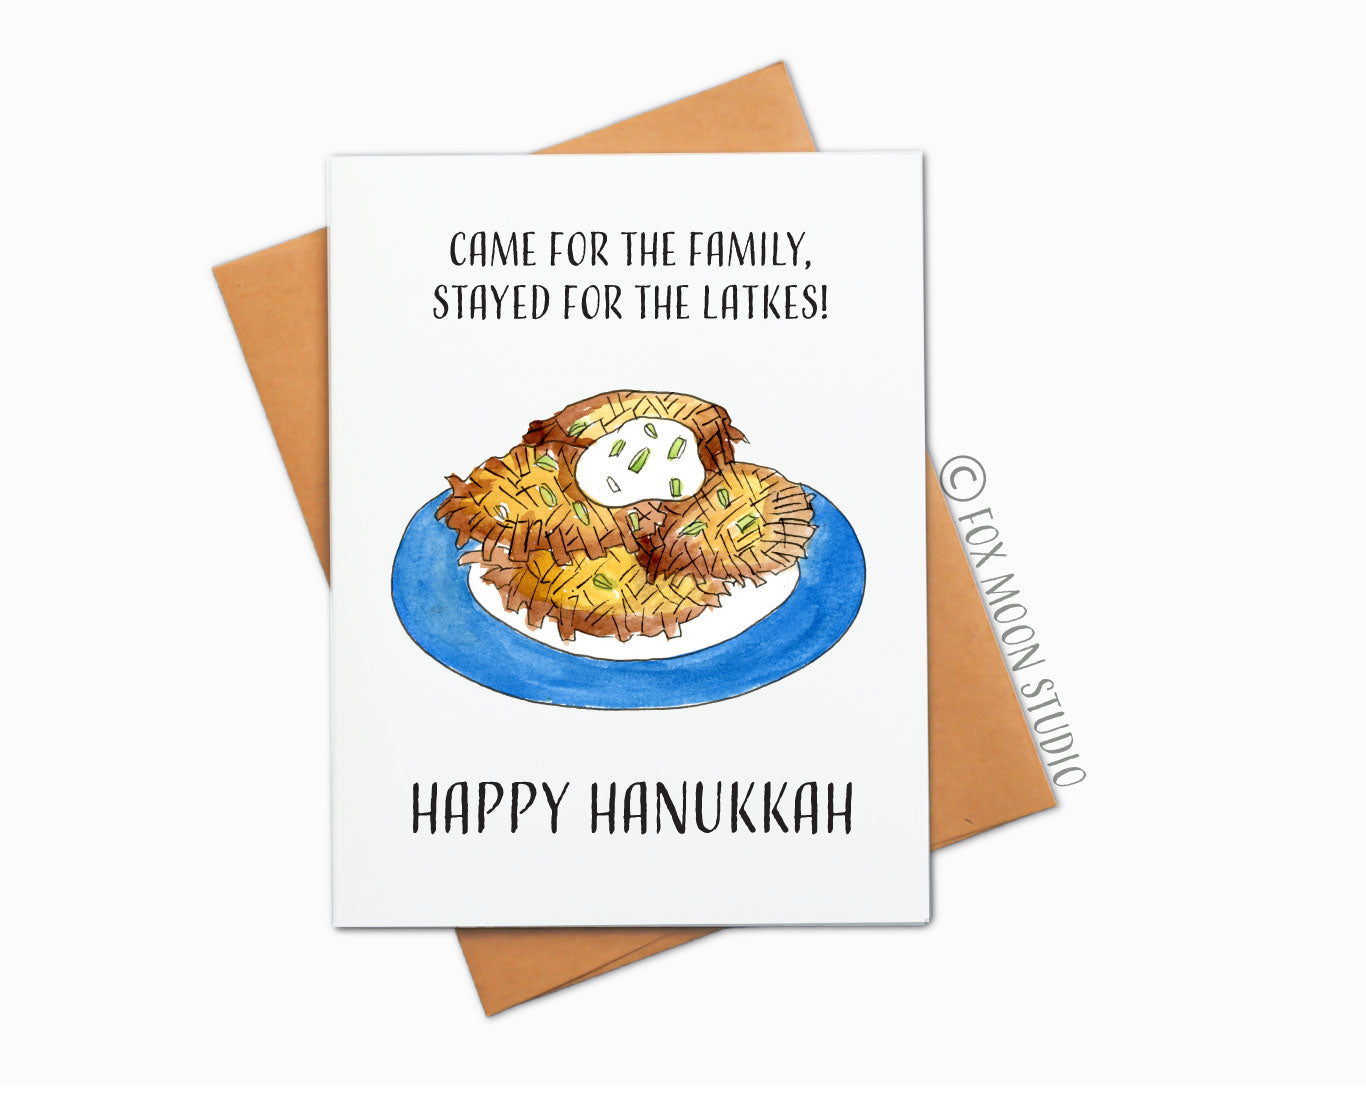 Came For The Family, Stayed For The Laktes!- Holiday Humor Hanukkah Greeting Card